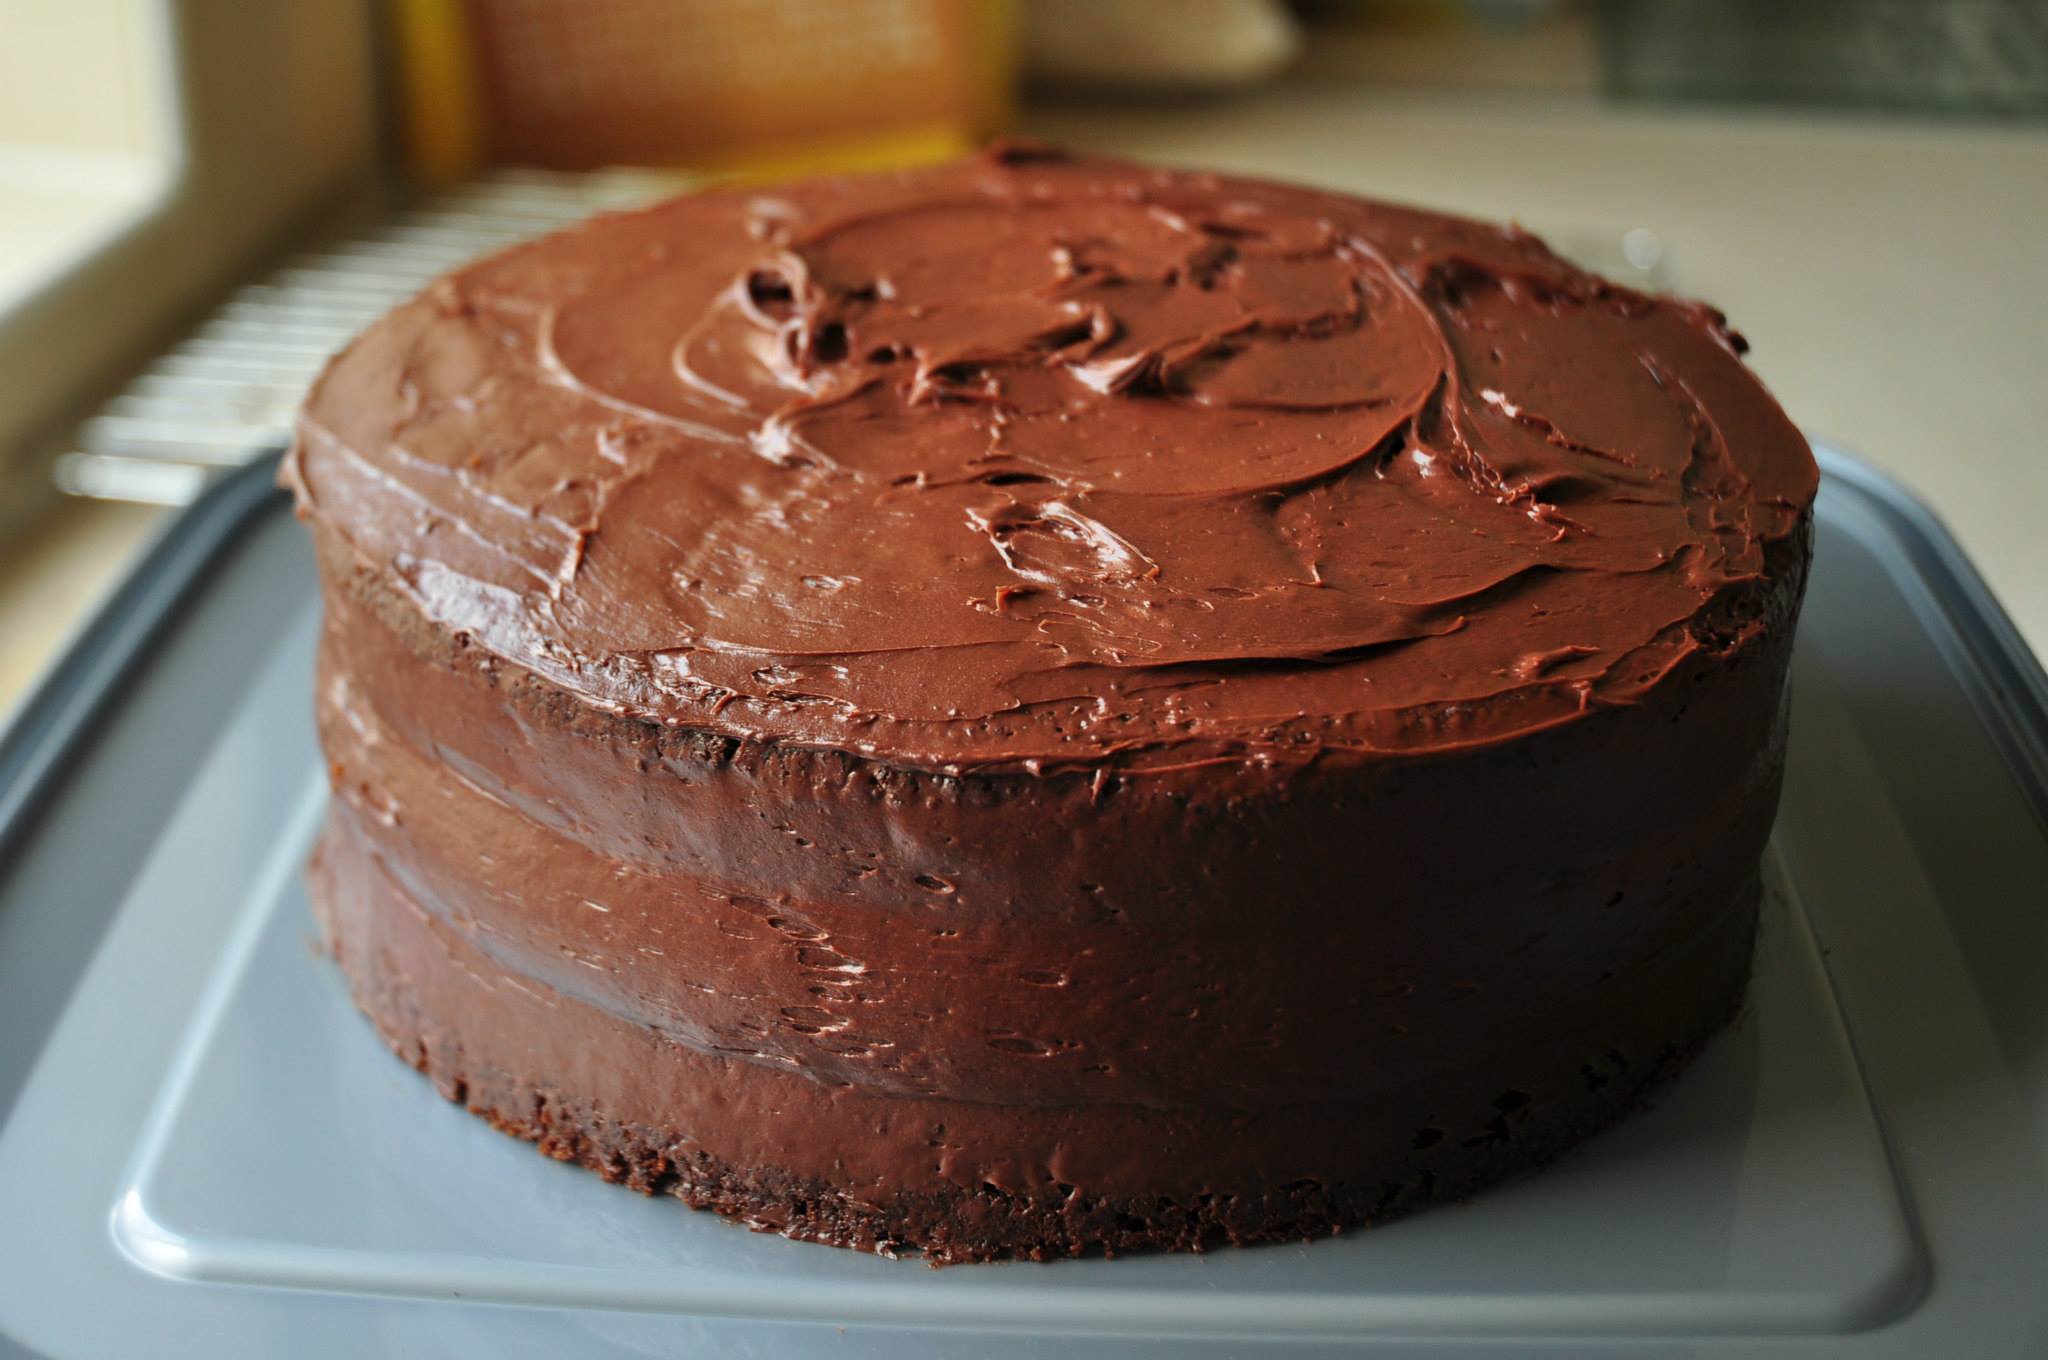 A home-baked chocolate cake | Source: Flickr